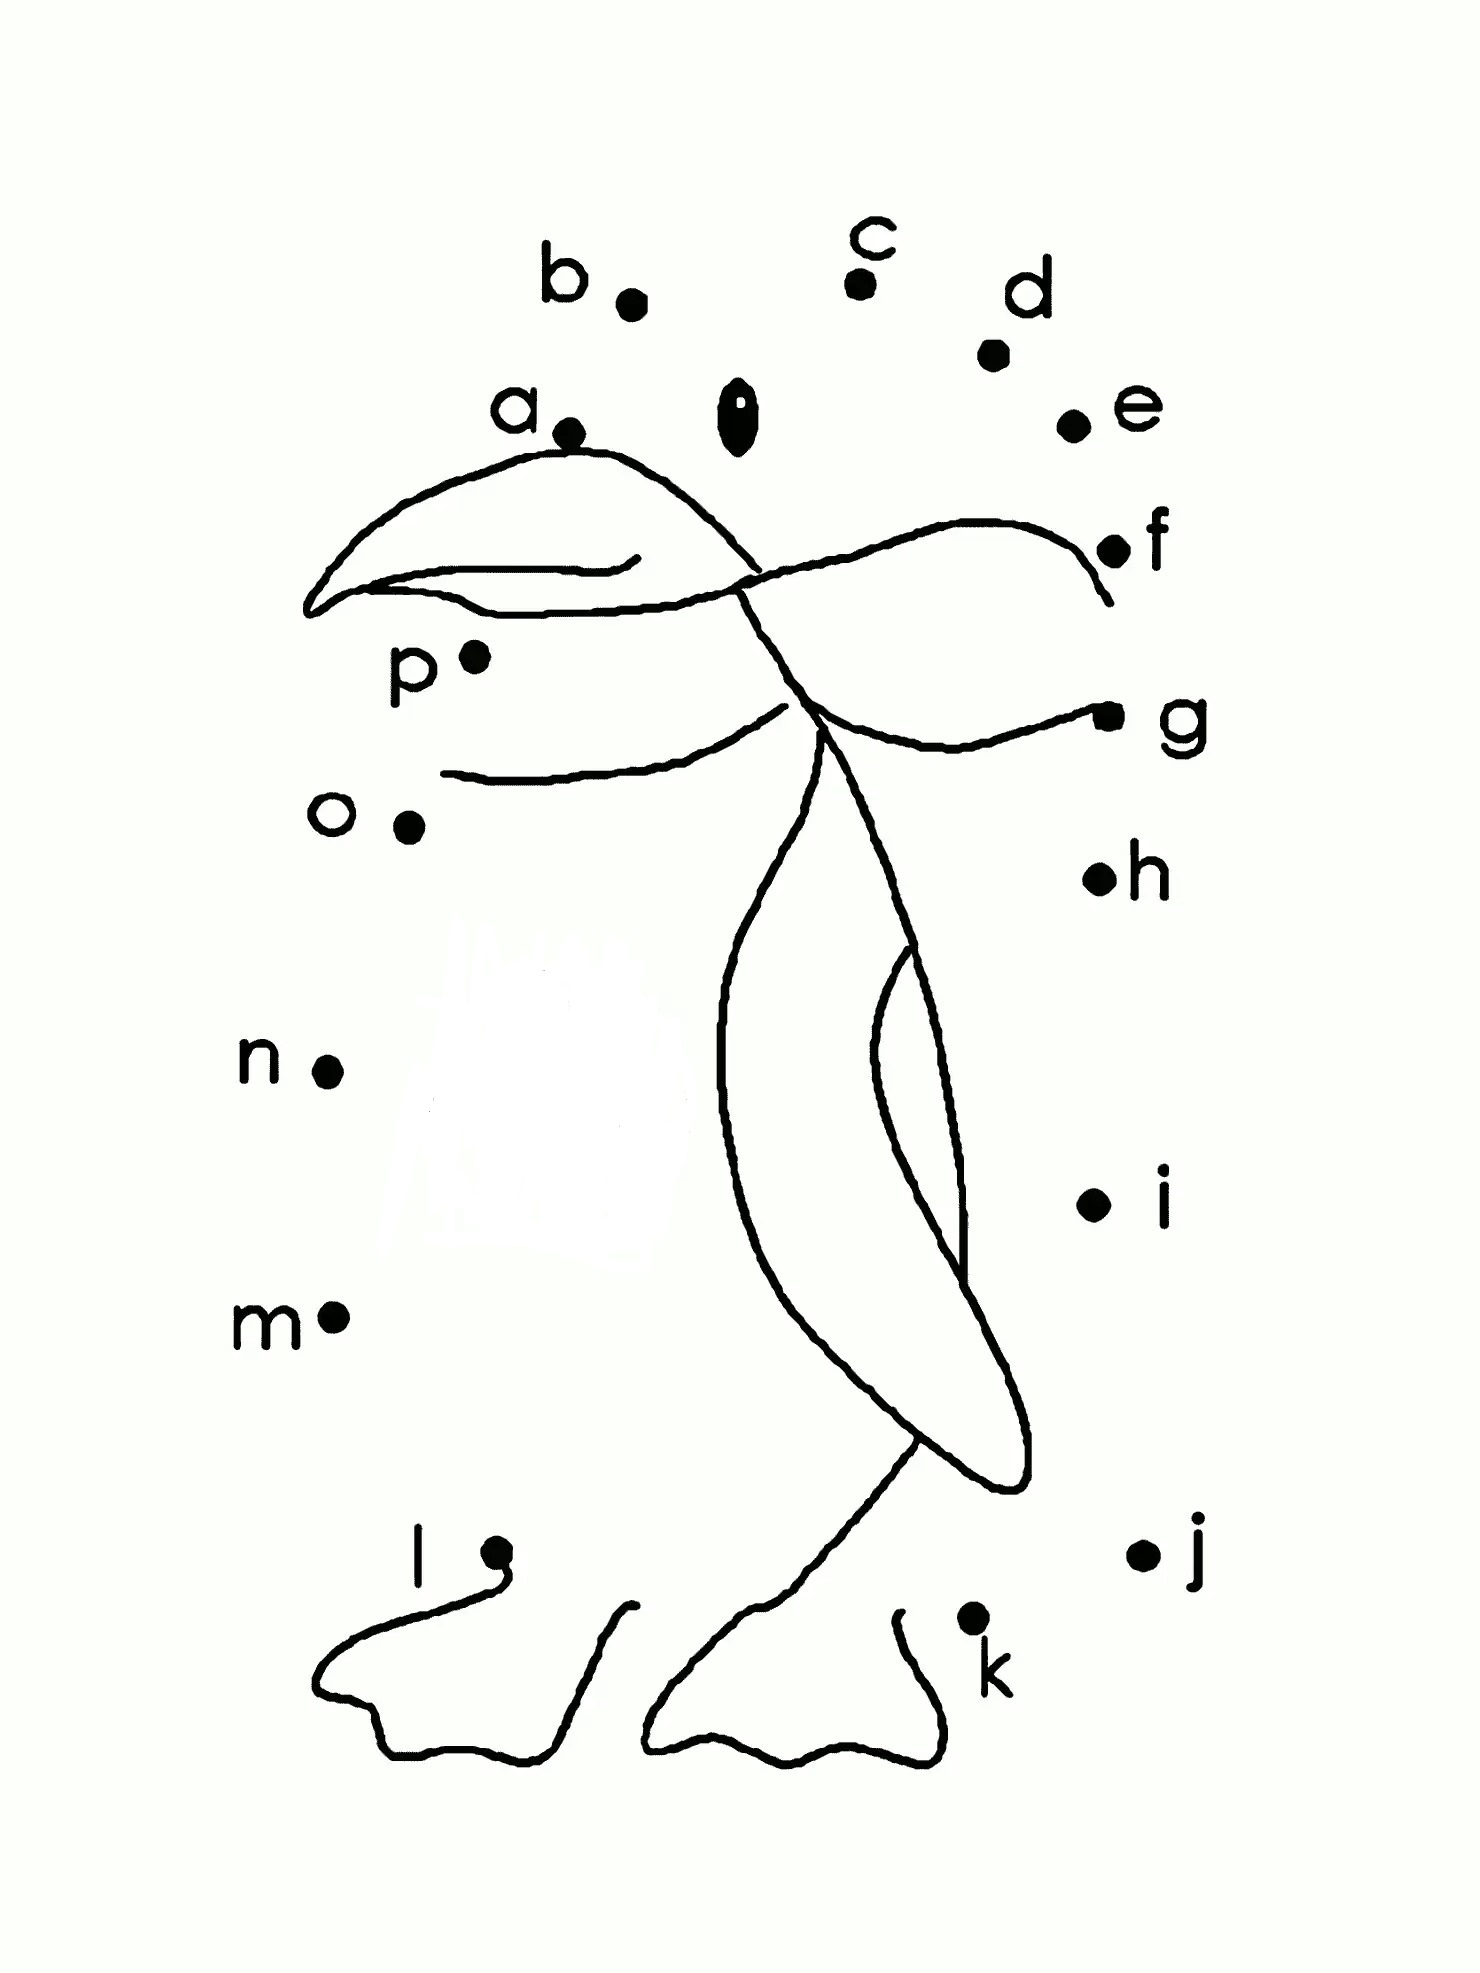 Penguin Dot To Dots Coloring Page - Free Printable Coloring Pages for Kids